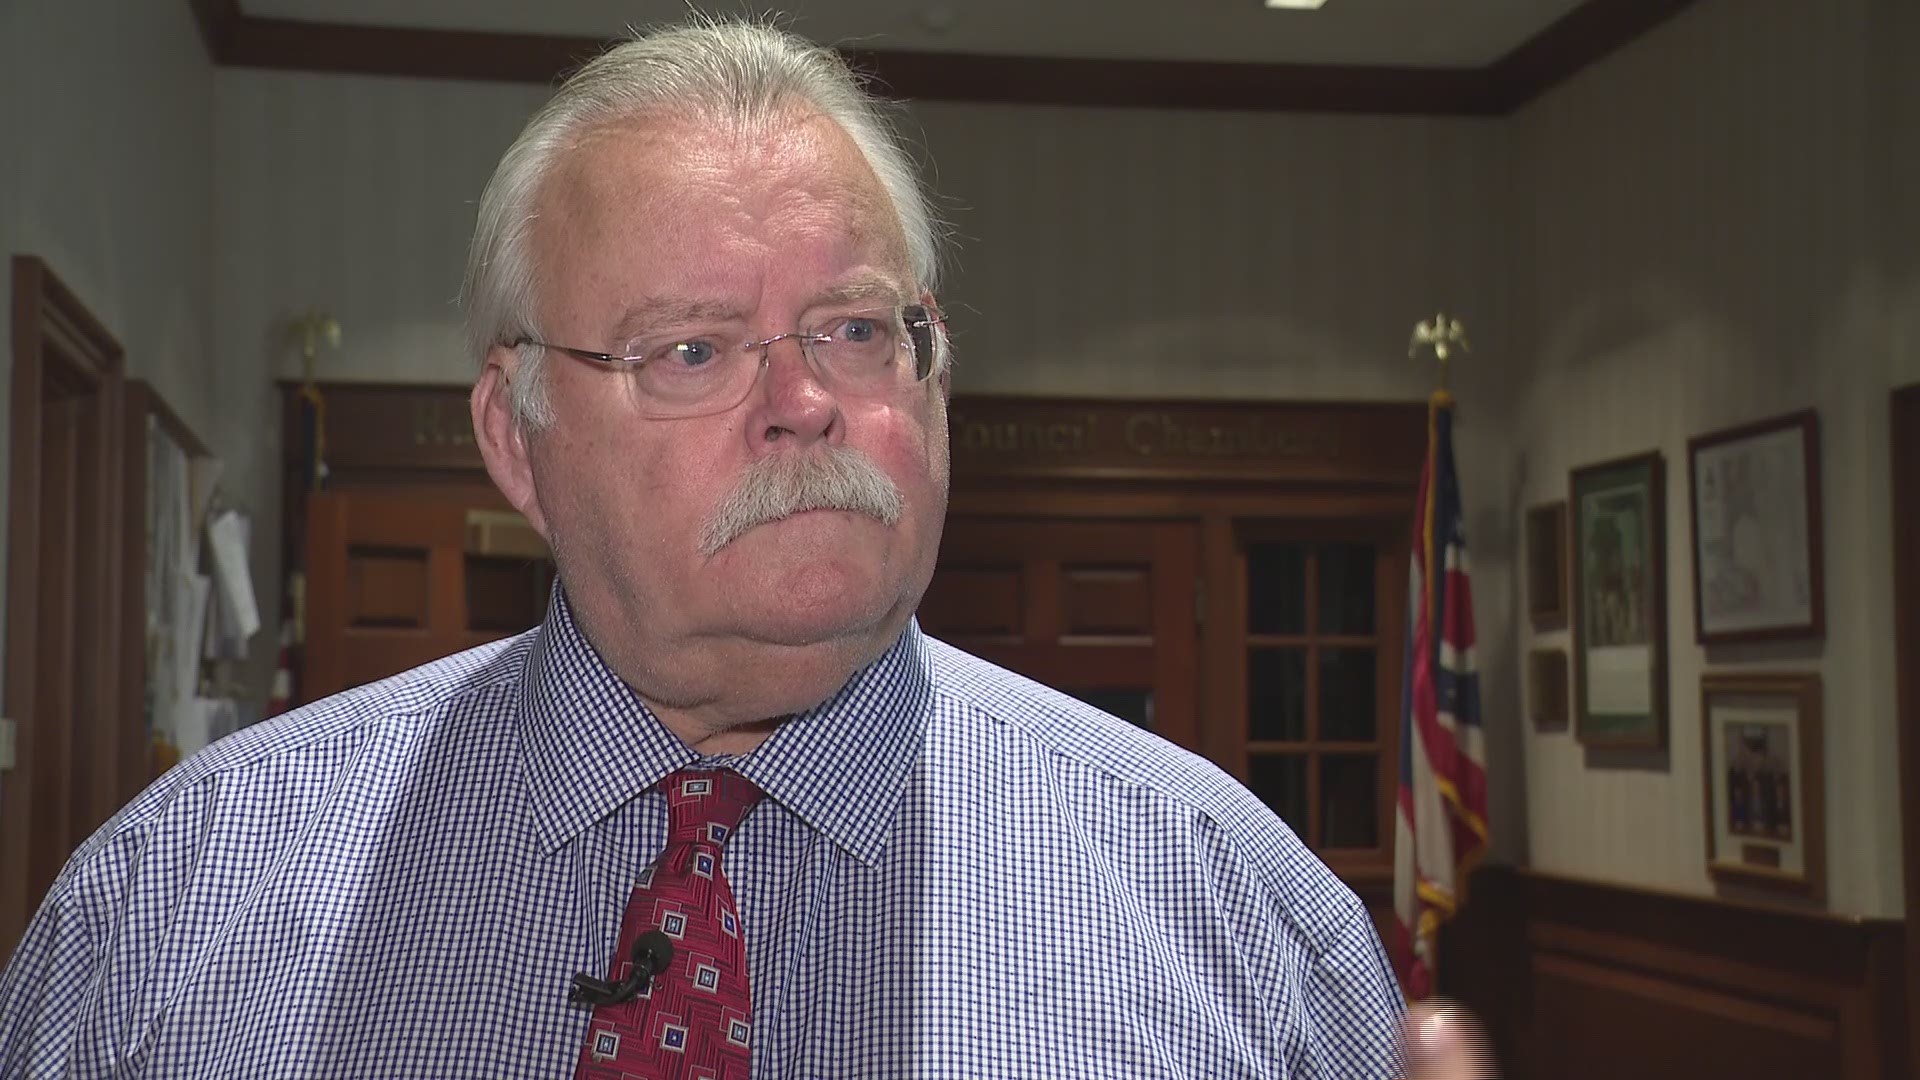 Brecksville Mayor Jerry Hruby talks with WKYC's Dawn Kendrick about city's sewer tax decision